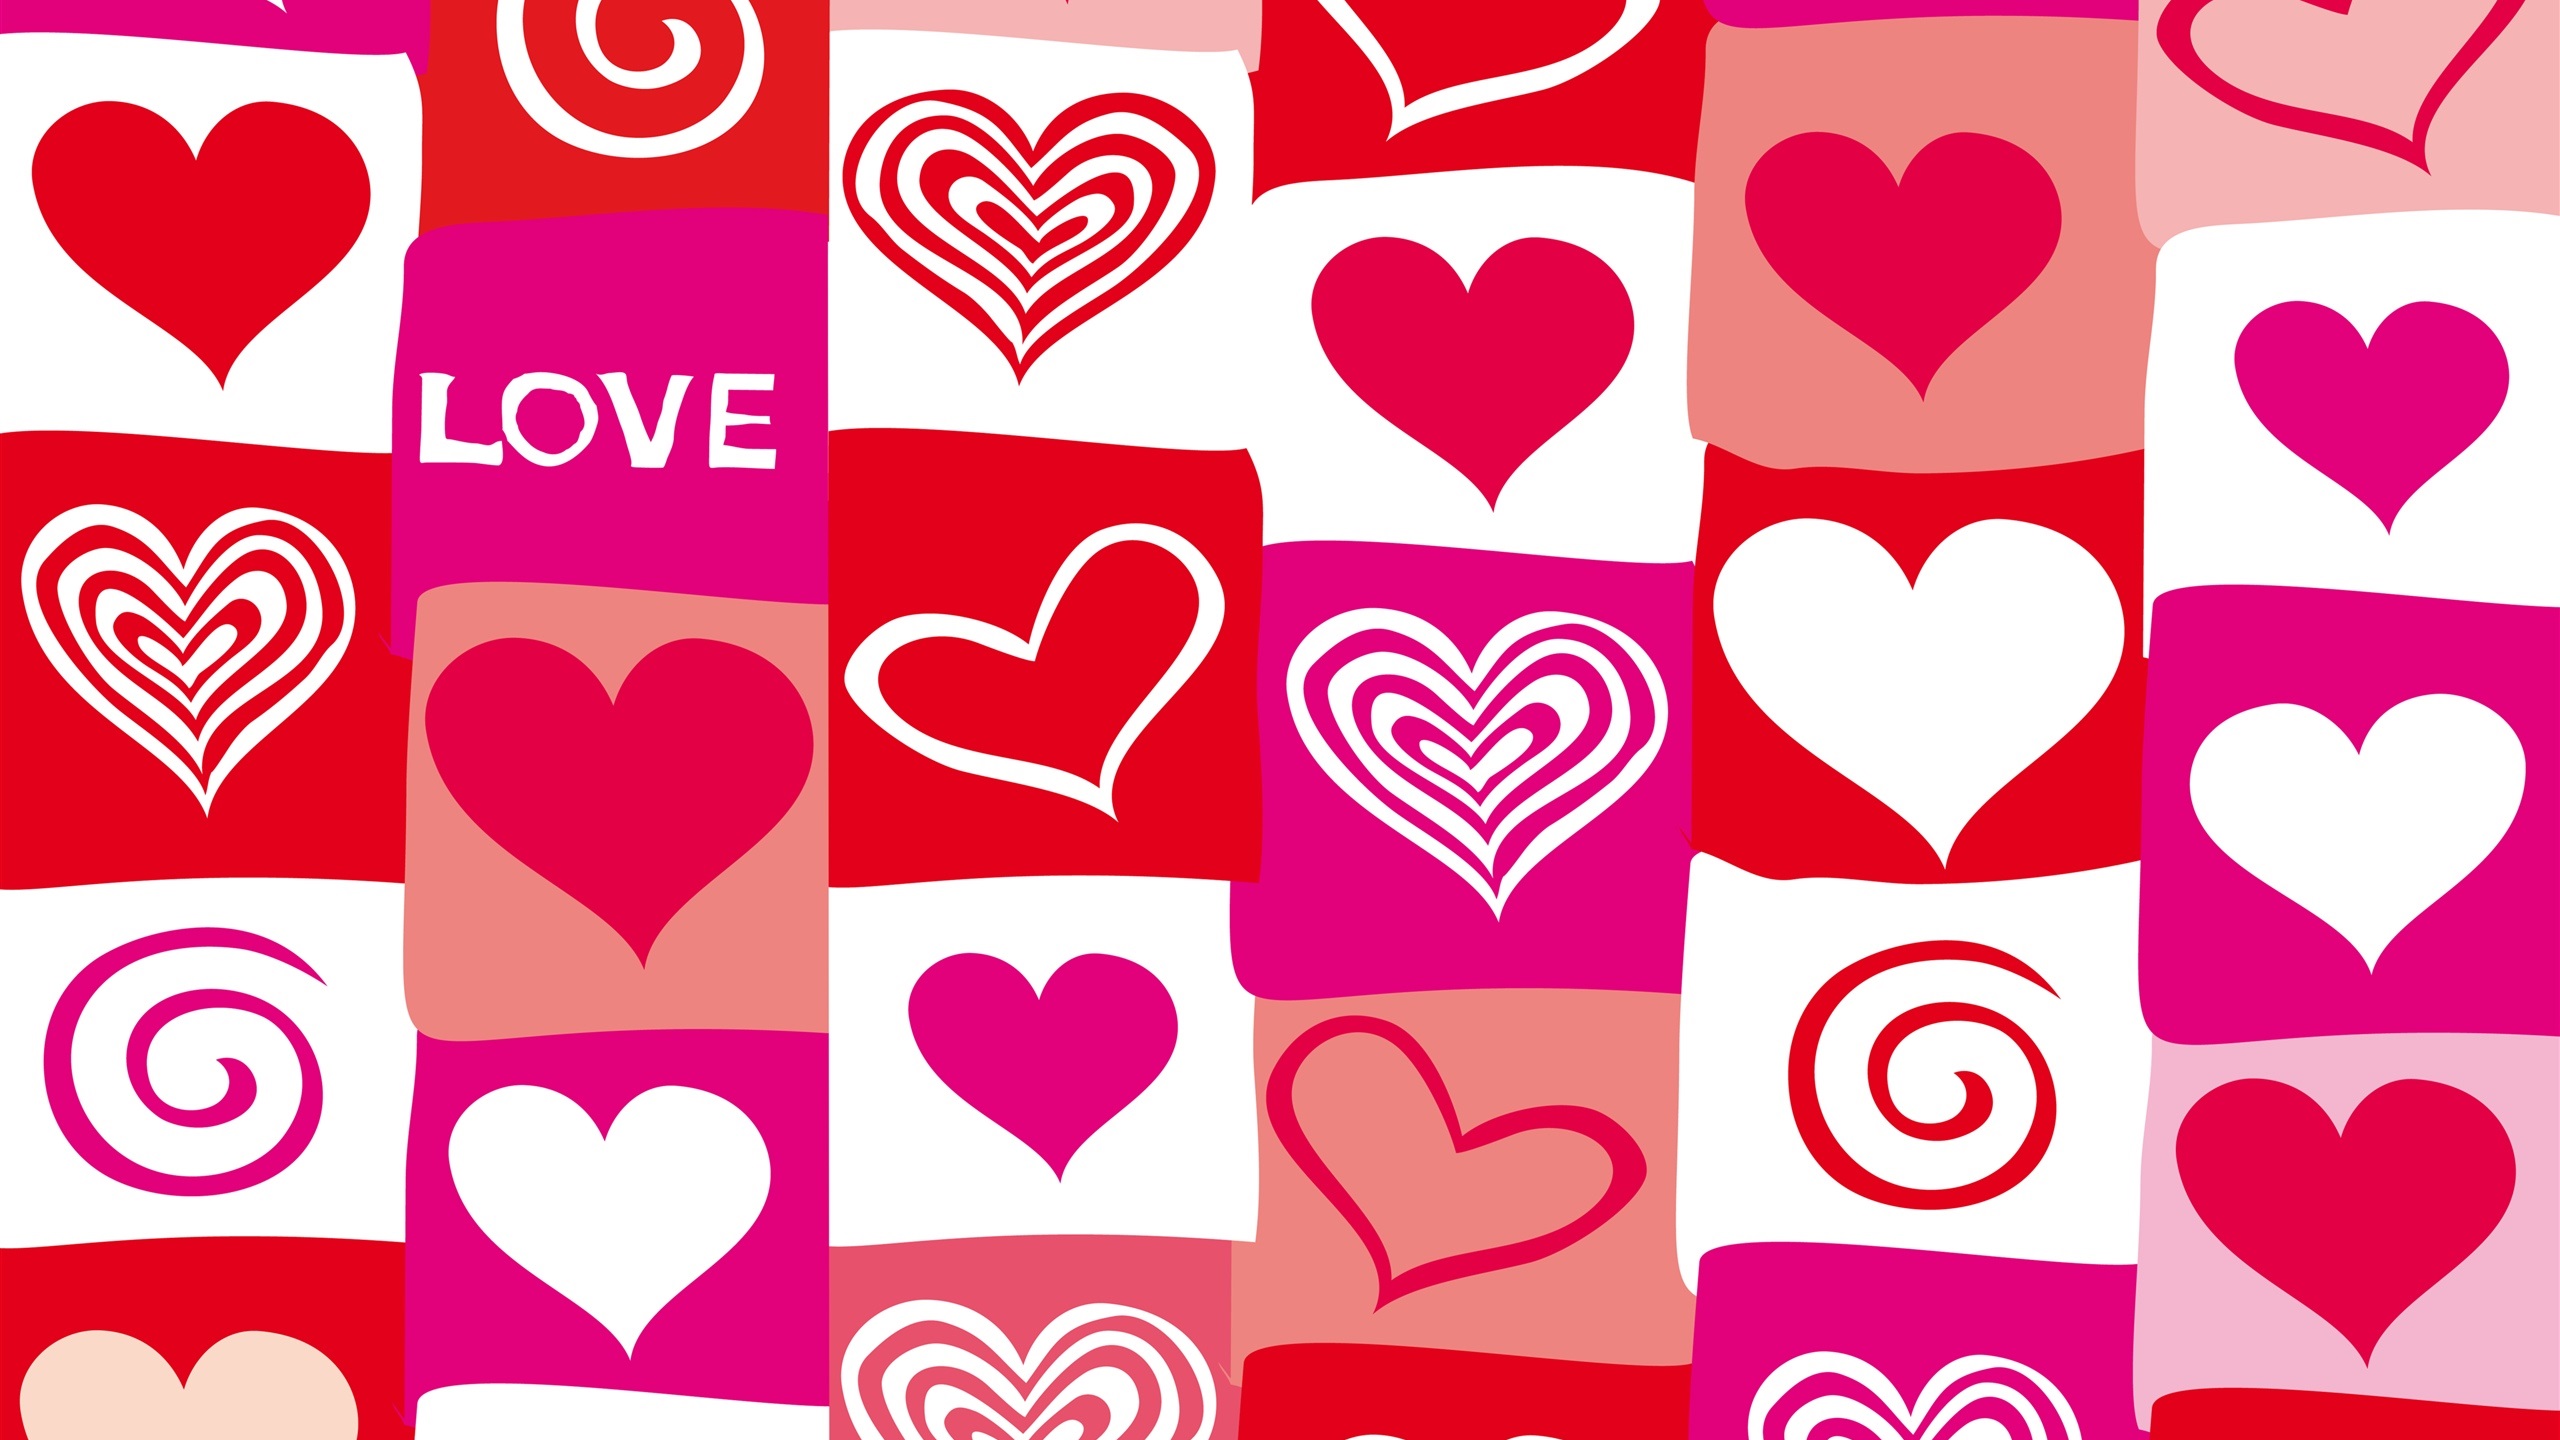 General 2560x1440 heart pink red white colorful